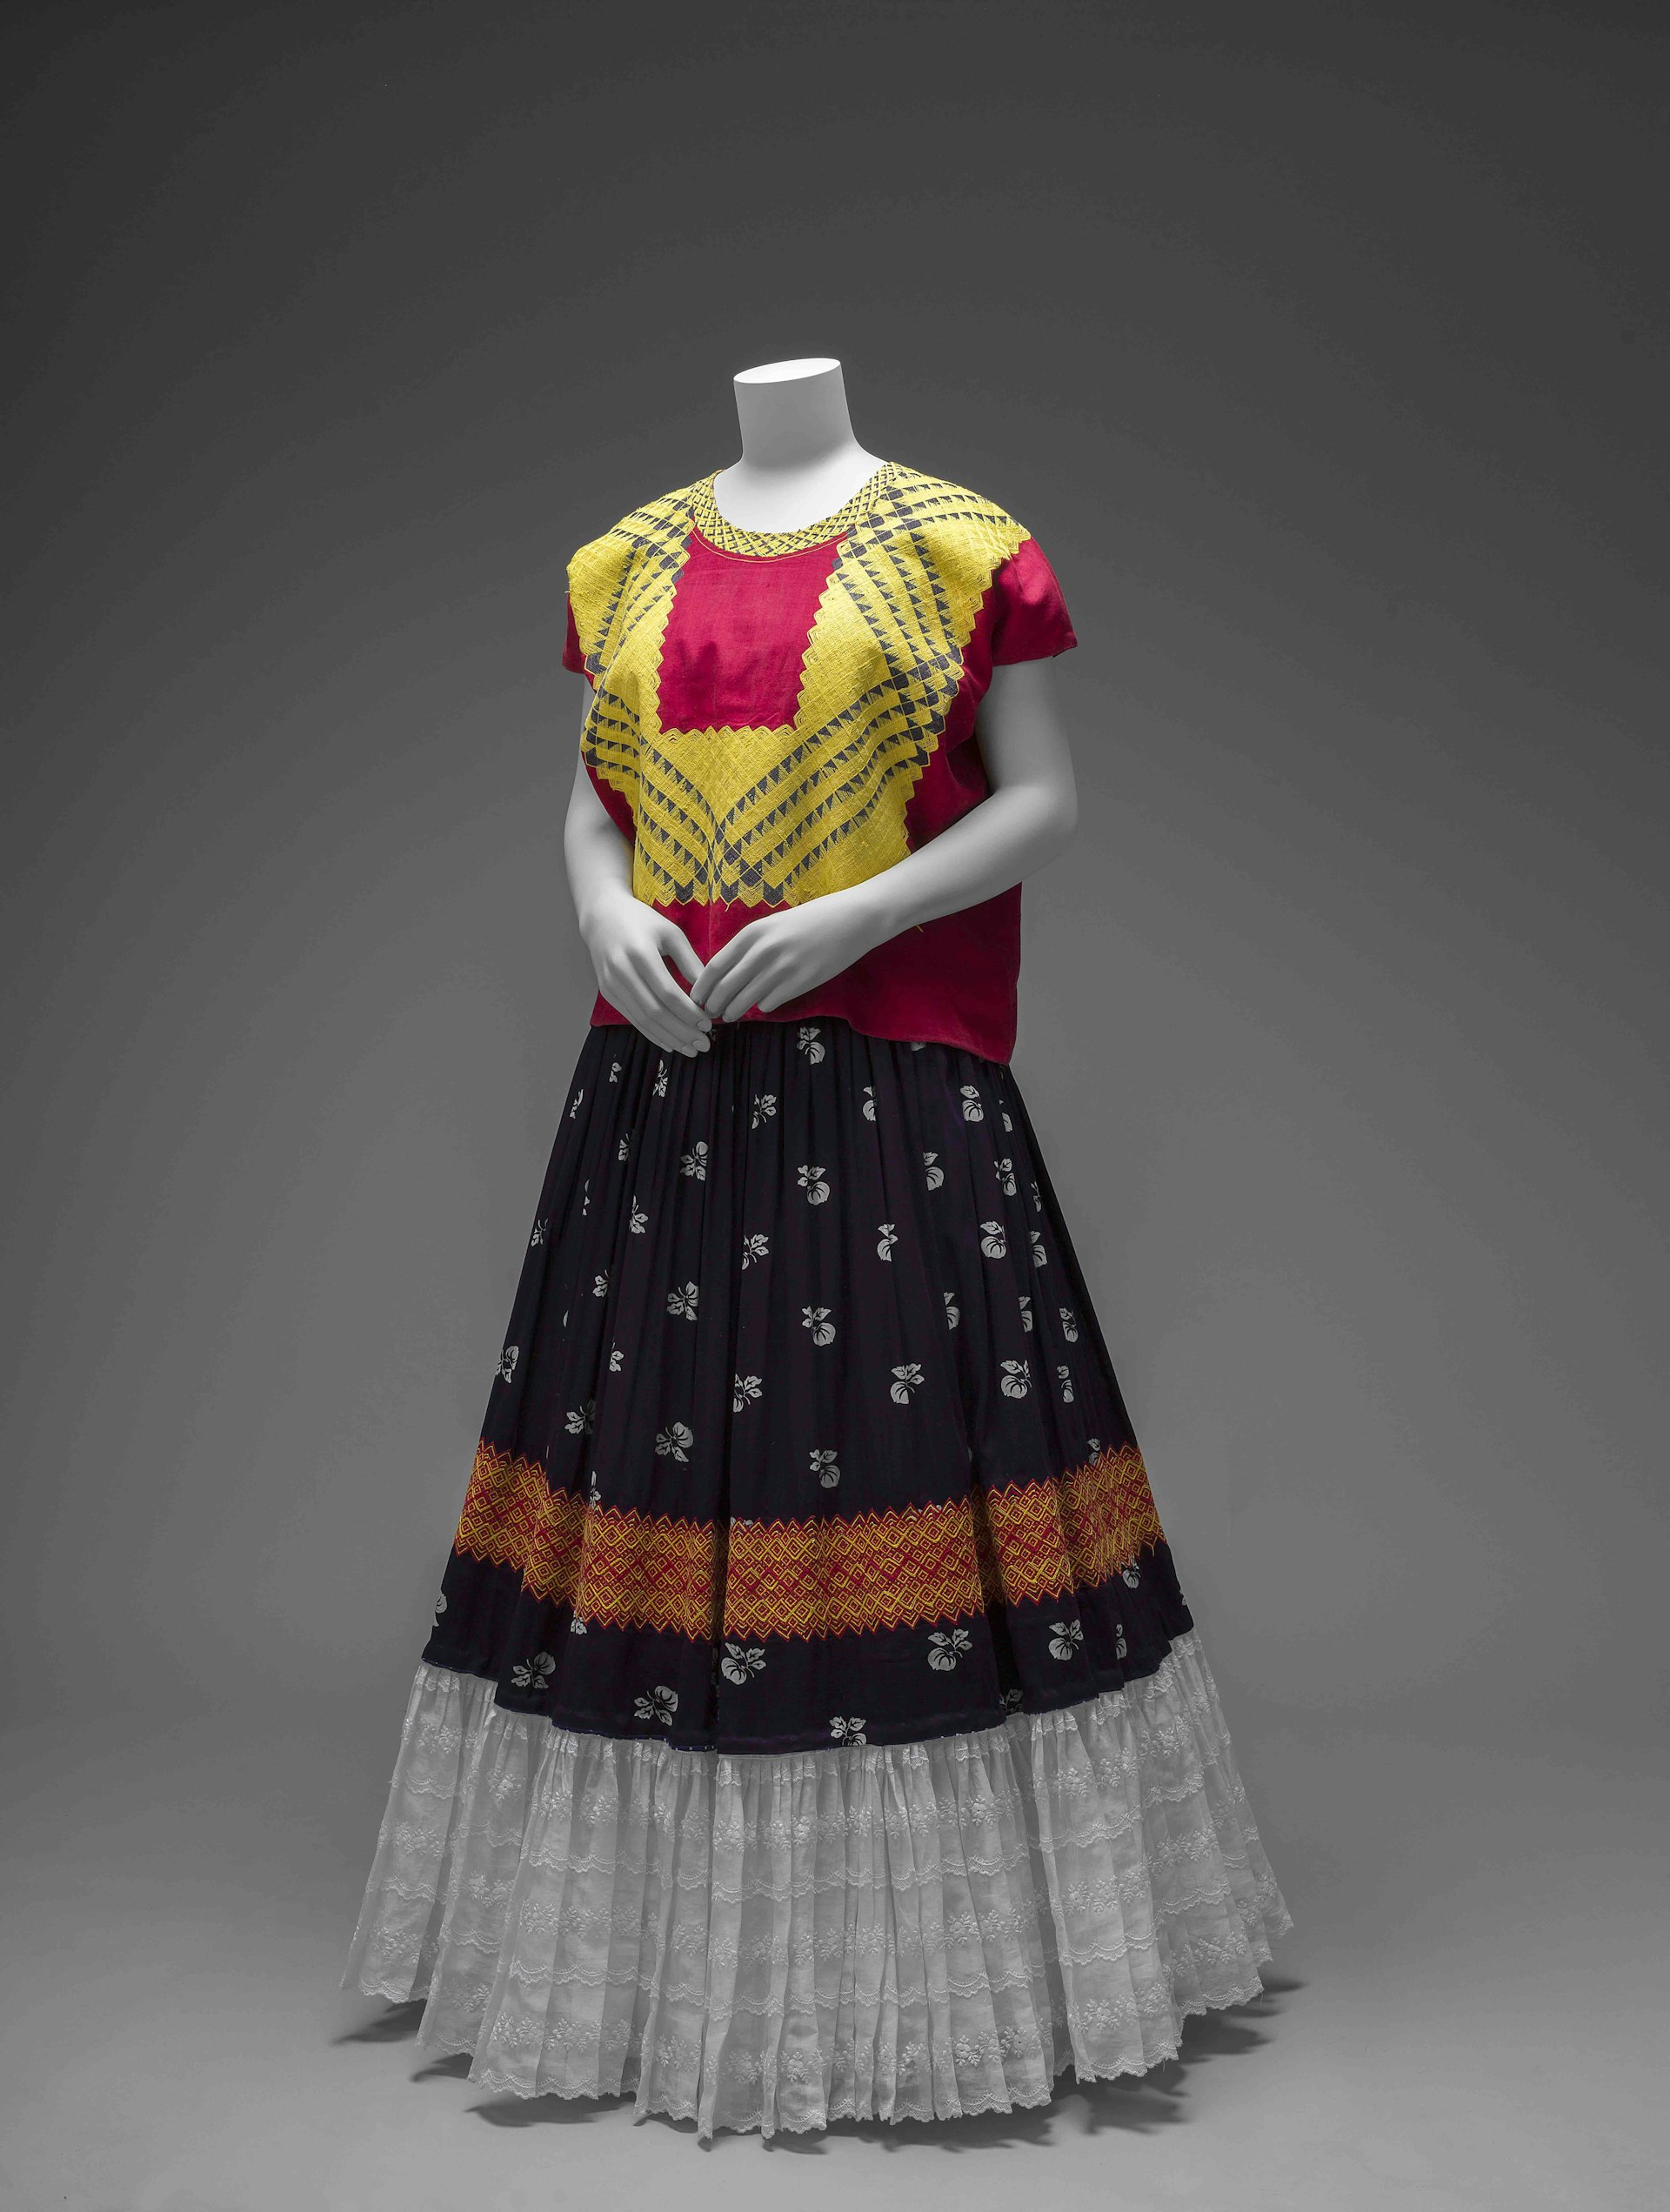 Cotton huipil with machine-embroidered chain stitch; printed cotton skirt with embroidery and holán. Ensemble from the Isthmus of Tehuantepec. Photograph Javier Hinojosa. © Diego Riviera and Frida Kahlo Archives, Banco de México, Fiduciary of the Trust of the Diego Riviera and Frida Kahlo Museums.